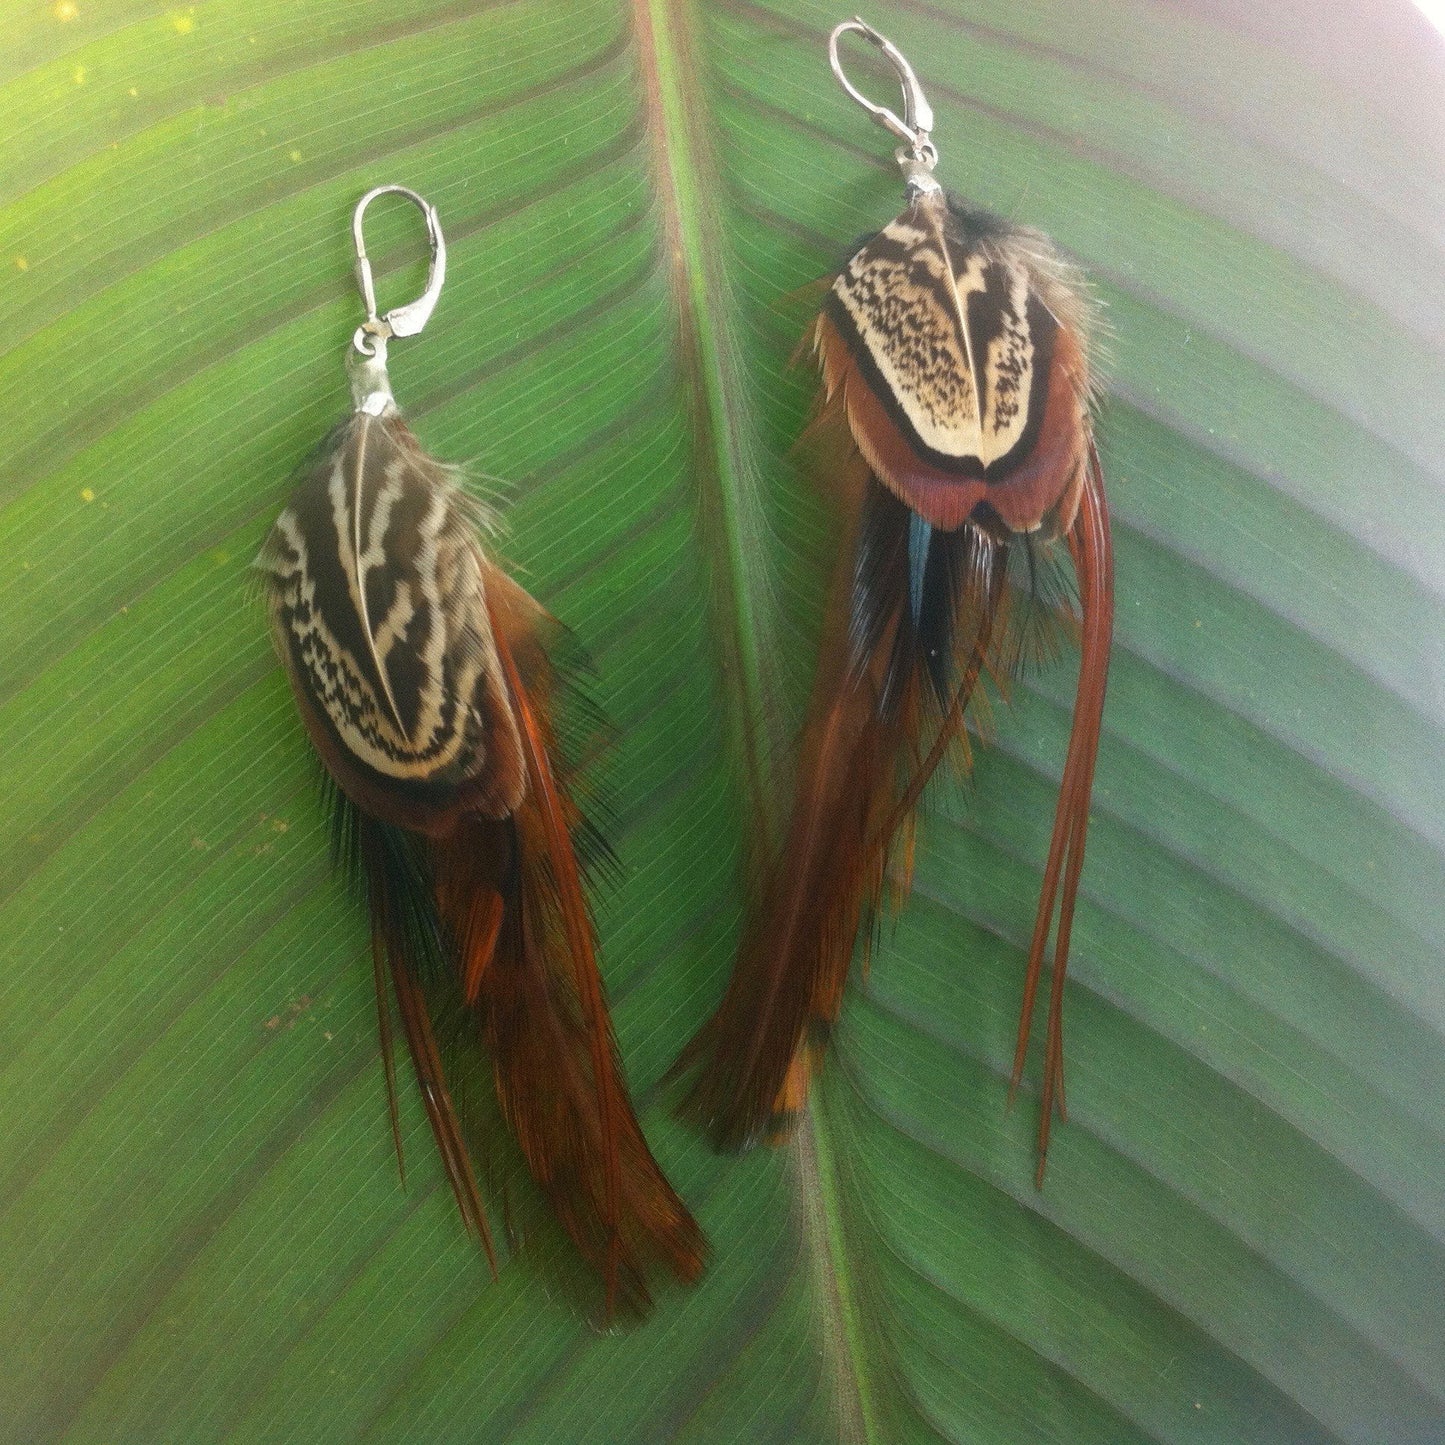 Natural Jewelry :|: Woodland Earth, Feather Earrings, 4"-5 inch Long. | Feather Earrings